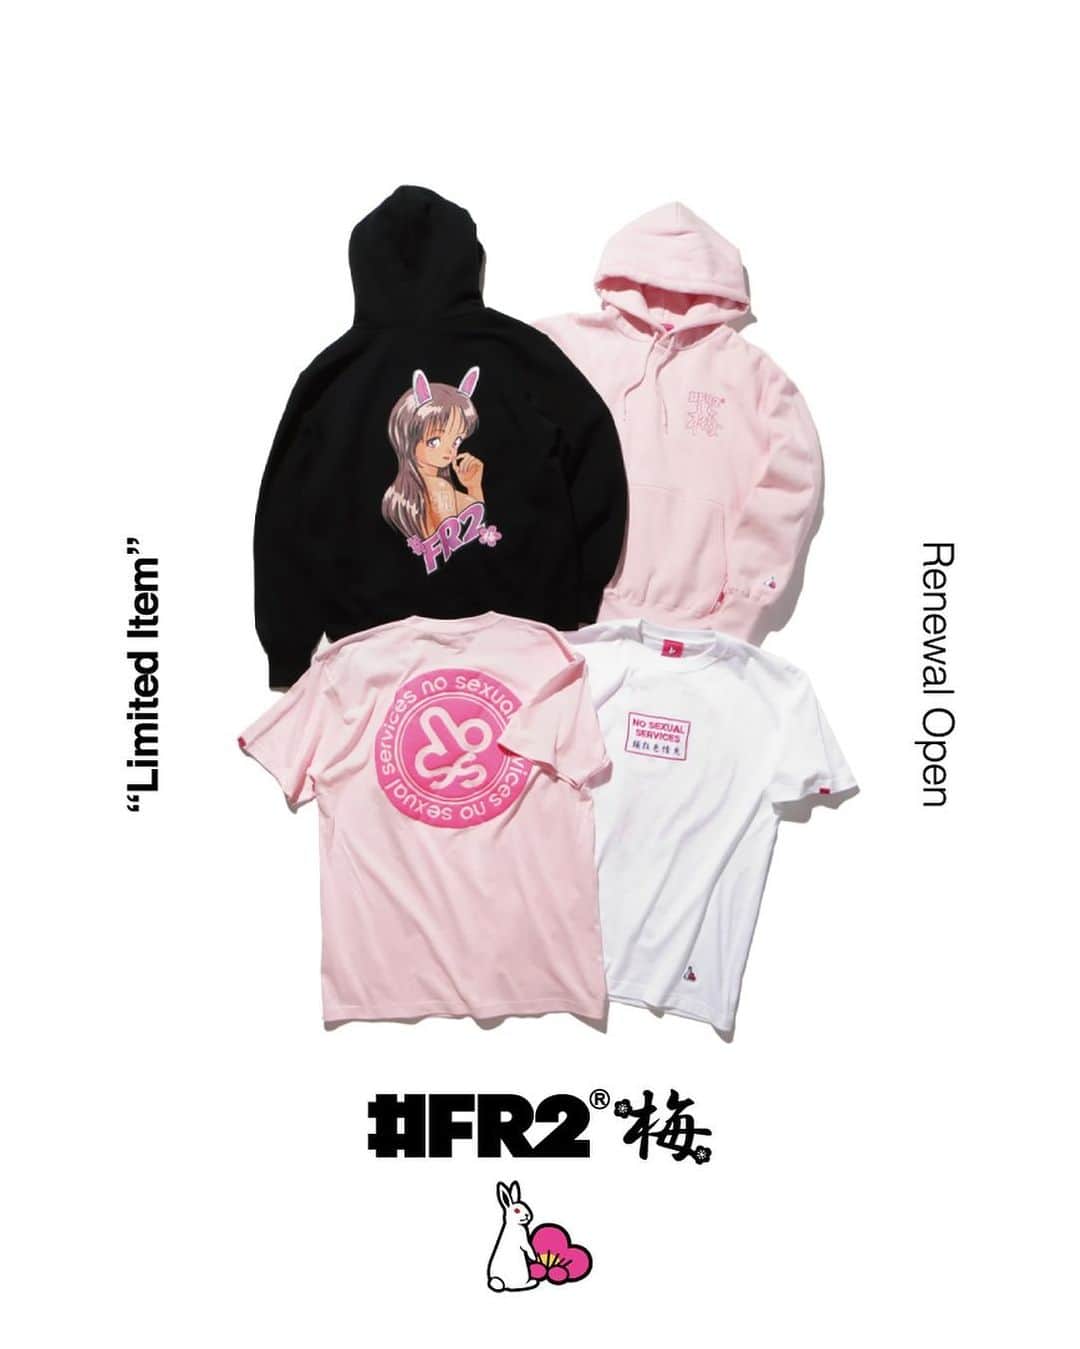 #FR2梅(UME)のインスタグラム：「#FR2梅　Renewal opening commemorative limited item　🐇🐇🩷  We will be selling the following products starting on 23/11/2023(Thu)  2023/11/23(Thu).より下記の商品を発売します。  ▪️FRC2772 NOSS Foam Print T-shirt (梅) ▪️FRC2773 Bunny Girl Hoodie (梅)  #FR2梅 #fxxkingrabbits #頭狂色情兎」